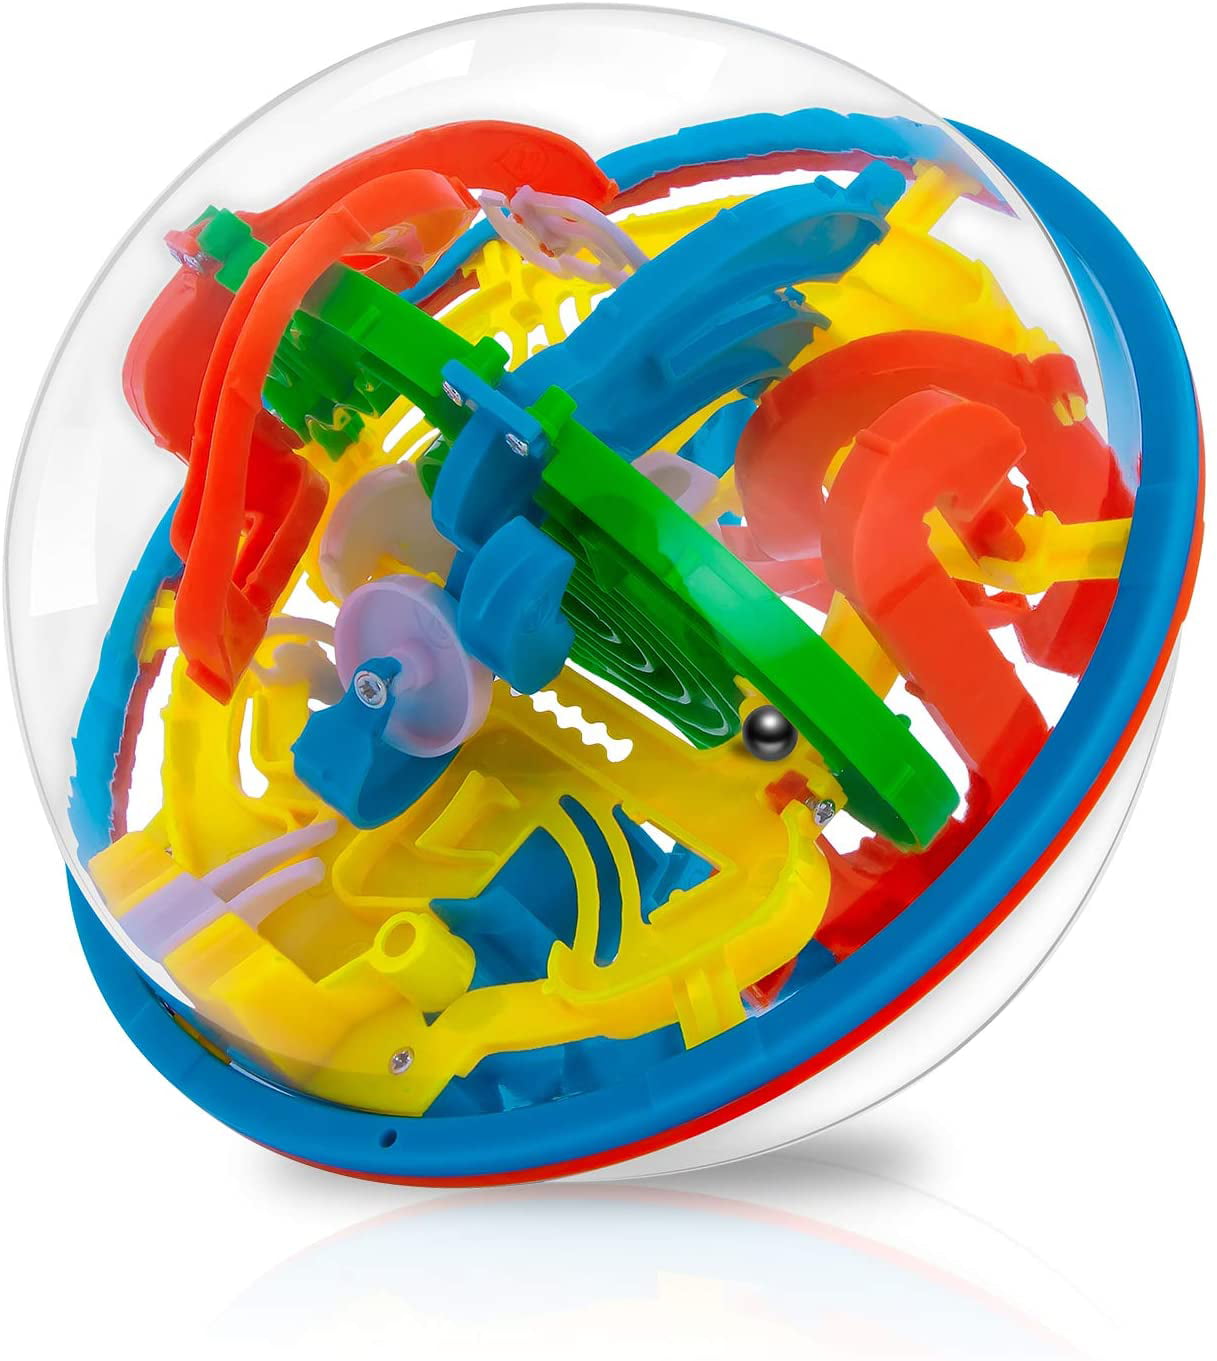 Puzzle Ball 3D Maze Intellect Kids Toy Brain Teaser Game     Kids Toy 